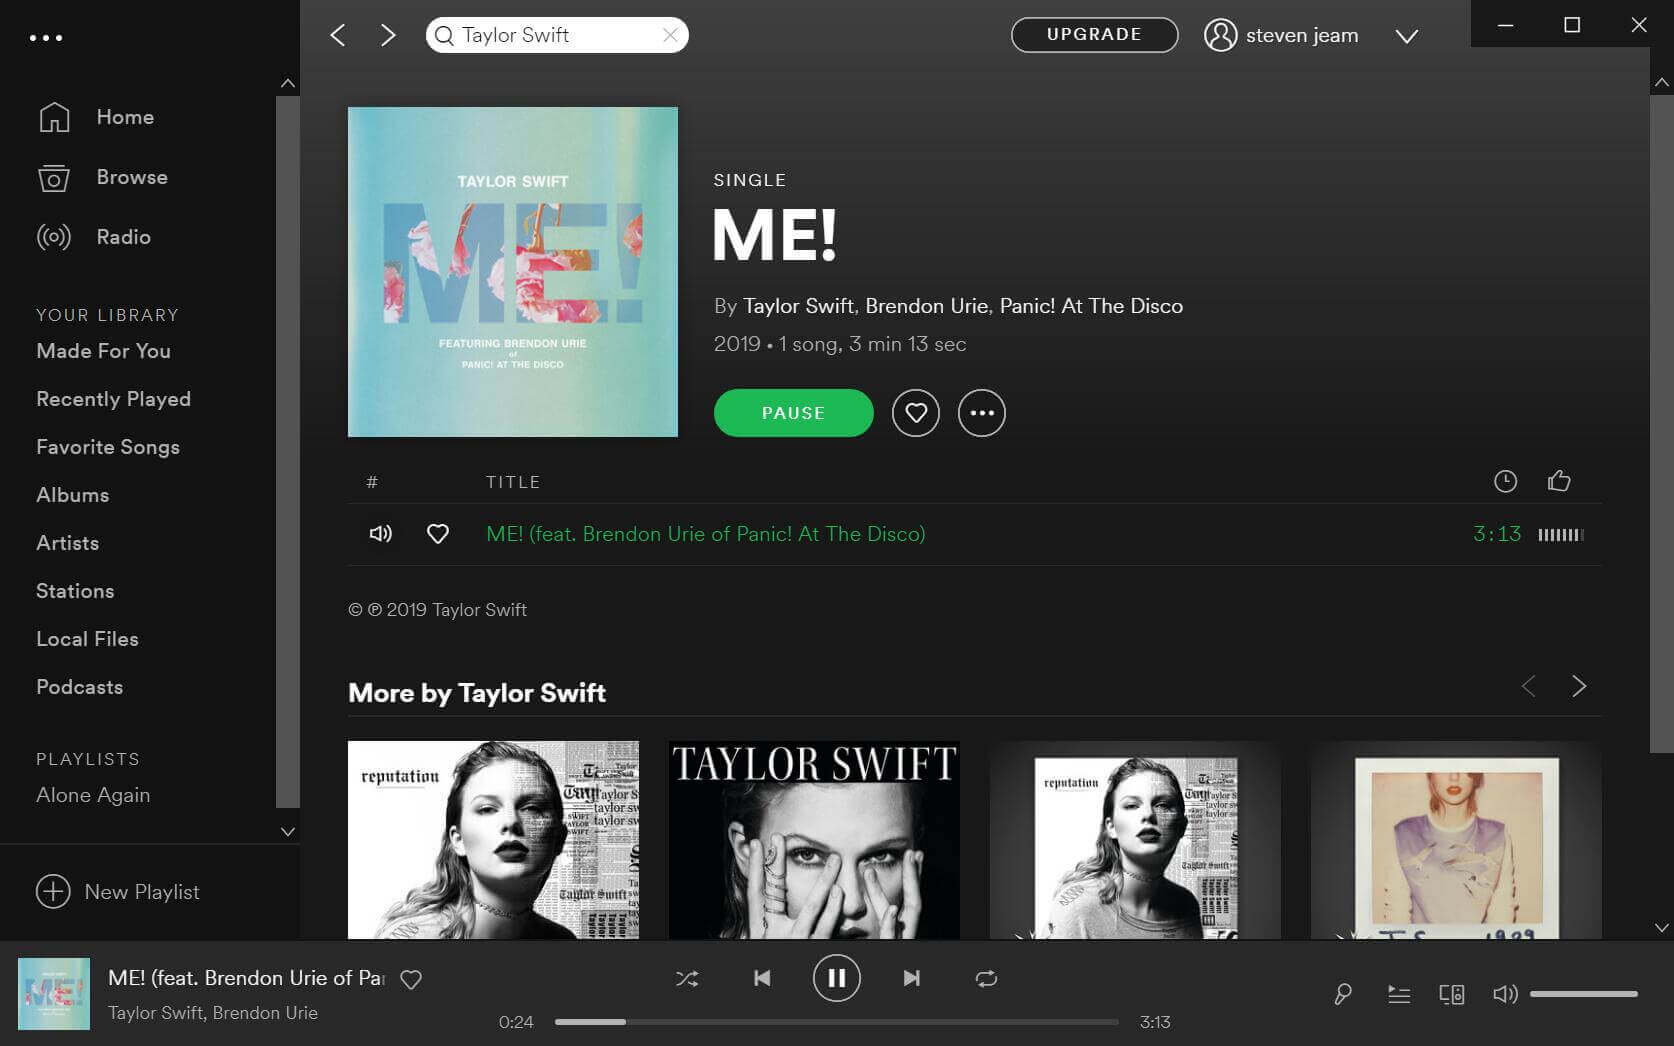 Download Taylor Swift Song To Mp3 On Spotify